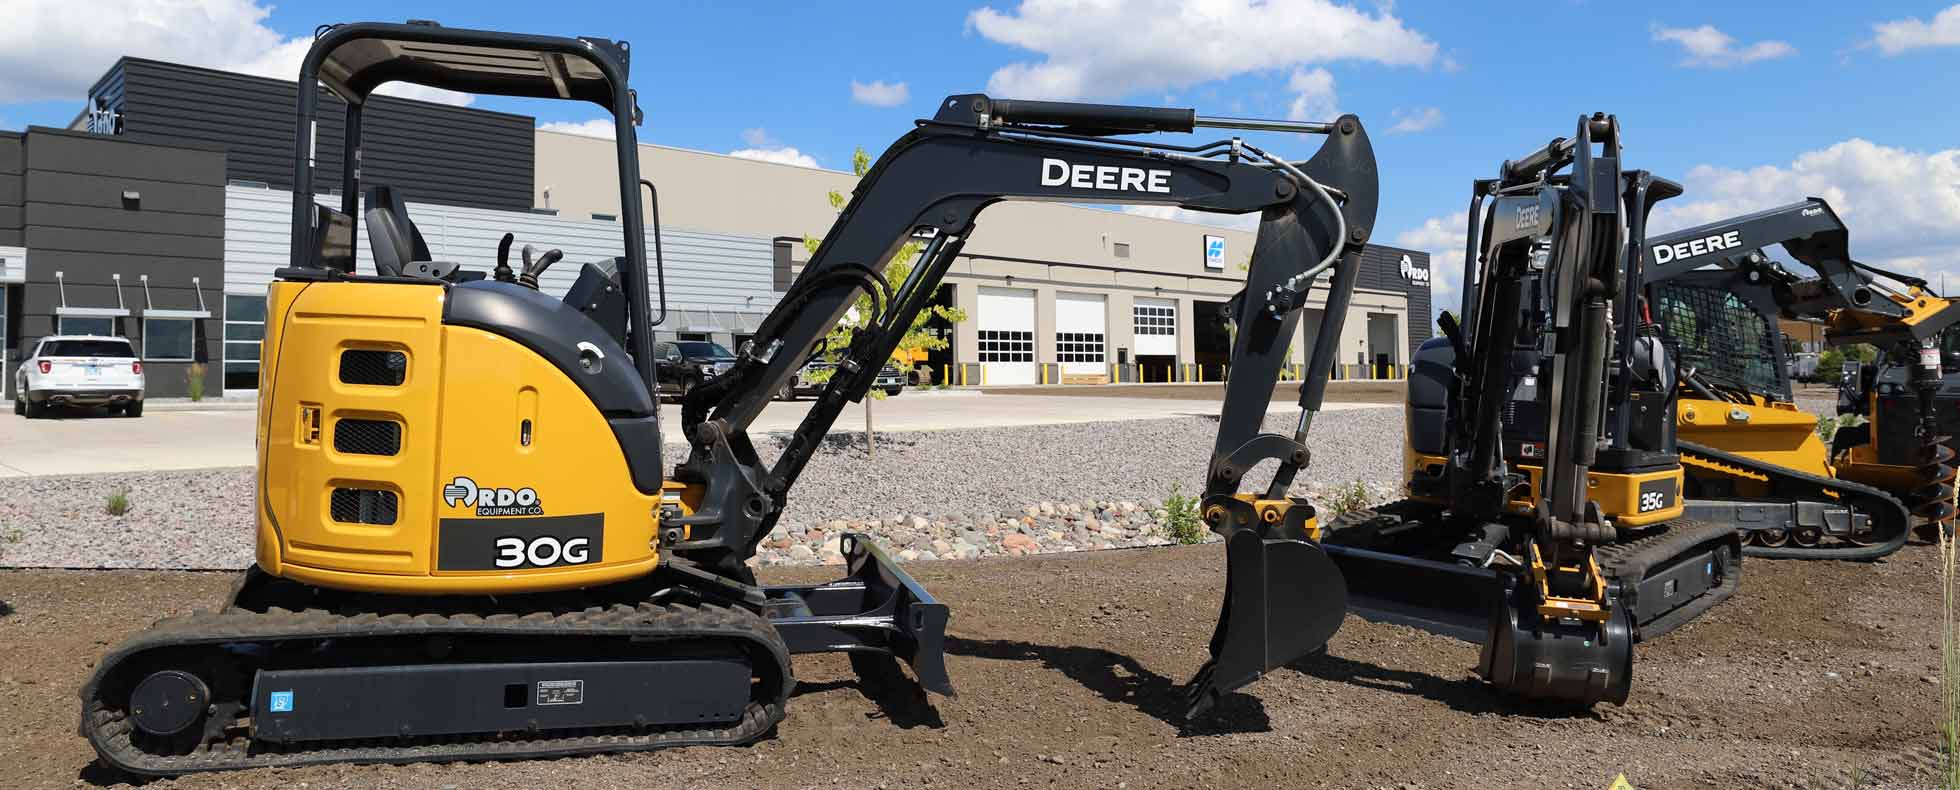 Compact Construction Equipment: Small and Mighty Machines Are More Popular Than Ever